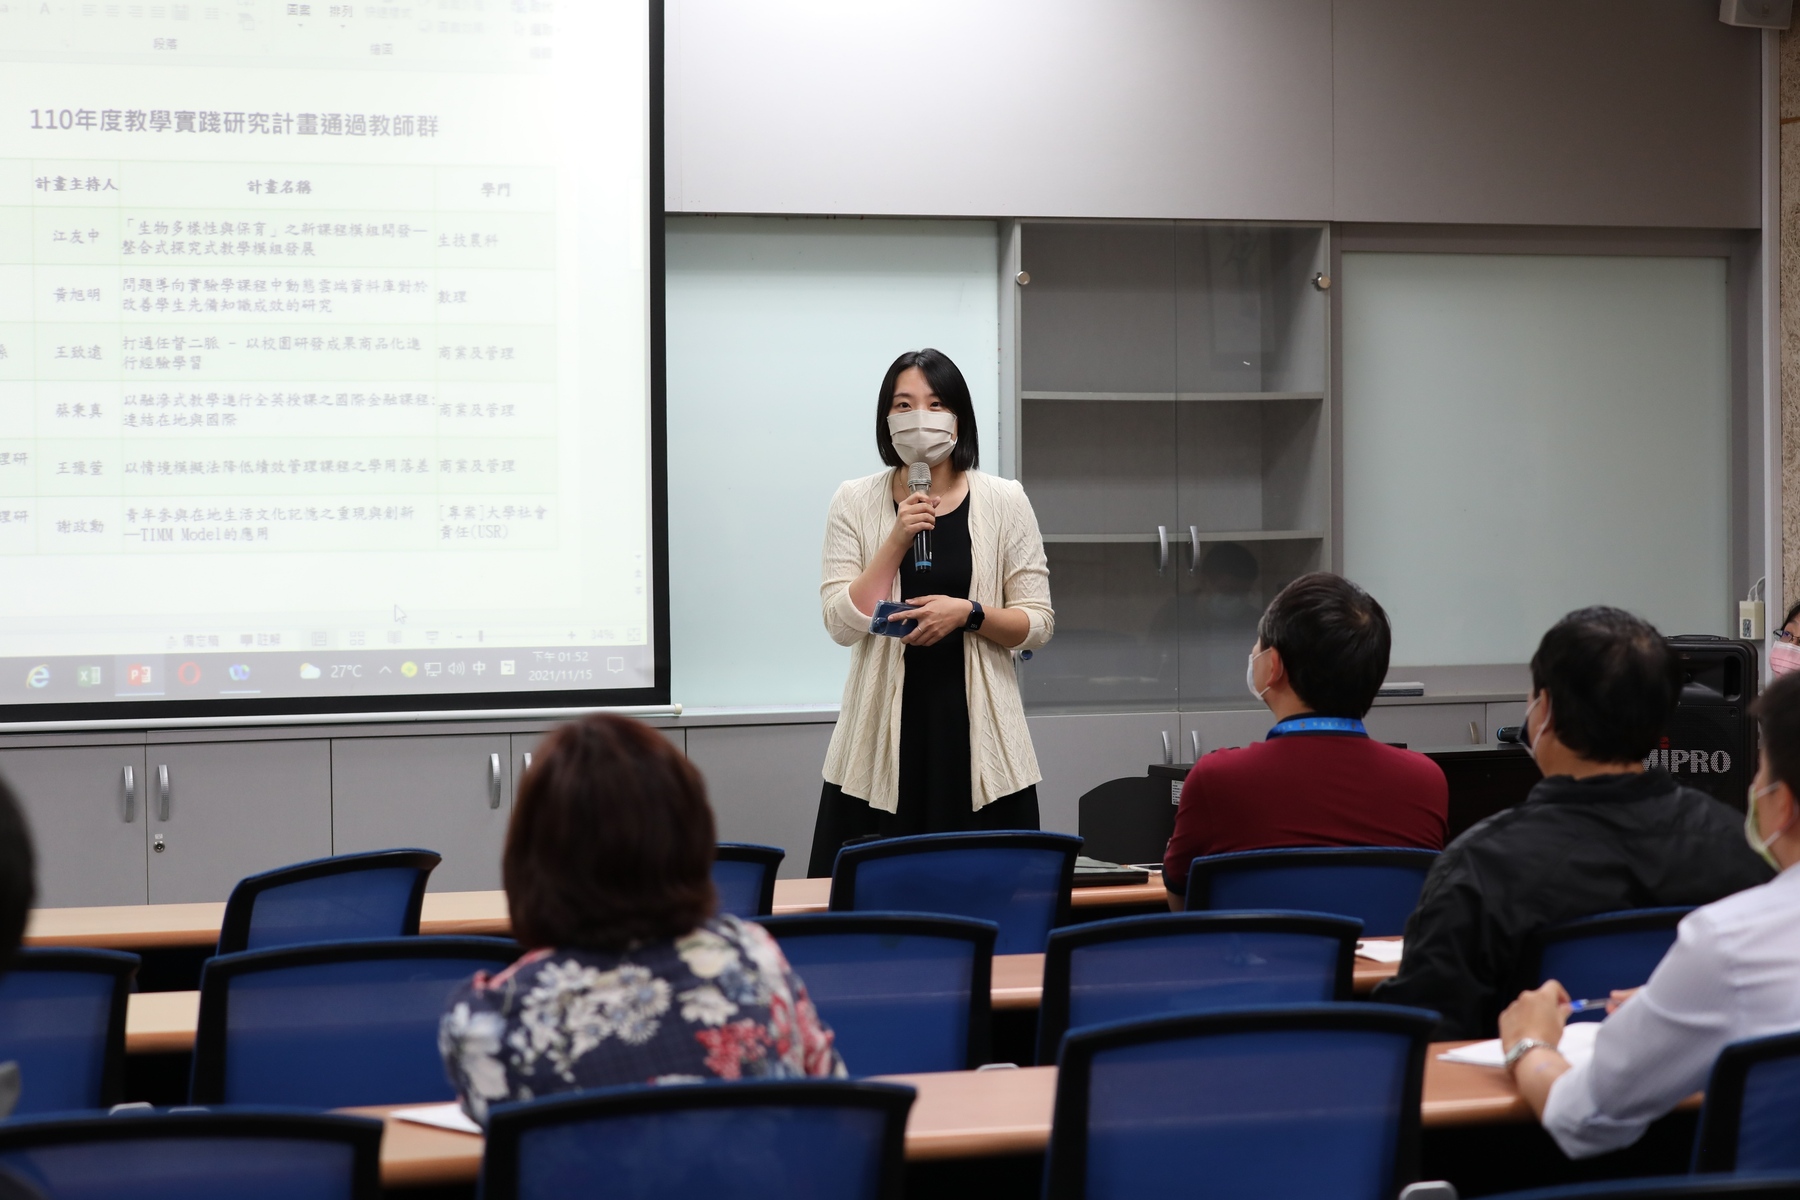 Assistant Professor Yu-Hsuan Wang of the Institute of Human Resource Management